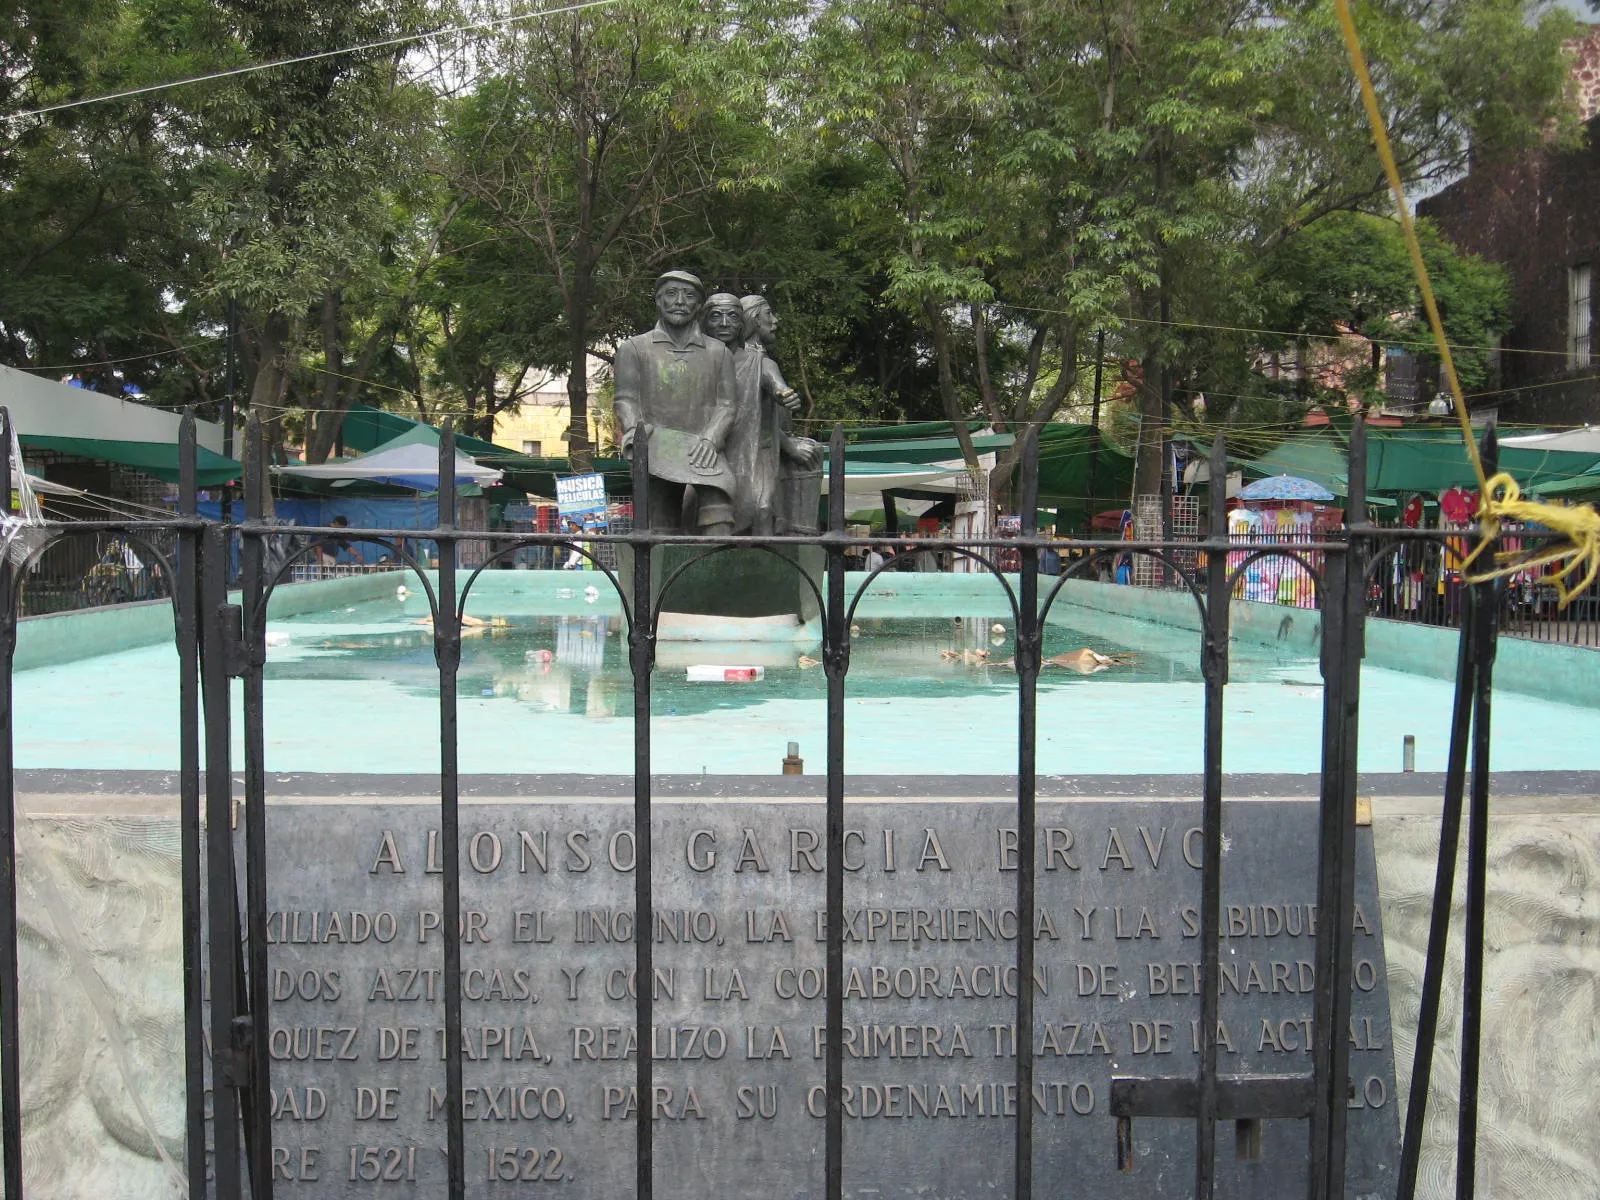 Photo showing: Fountain with busts honoring Alonso Garcia Bravo, who laid out post-Conquest Mexico City conserving much of the original Aztec infrastructure. Located off Merced Street between Jesus Maria and Talvera east of the Zocalo in the Centro of Mexico City